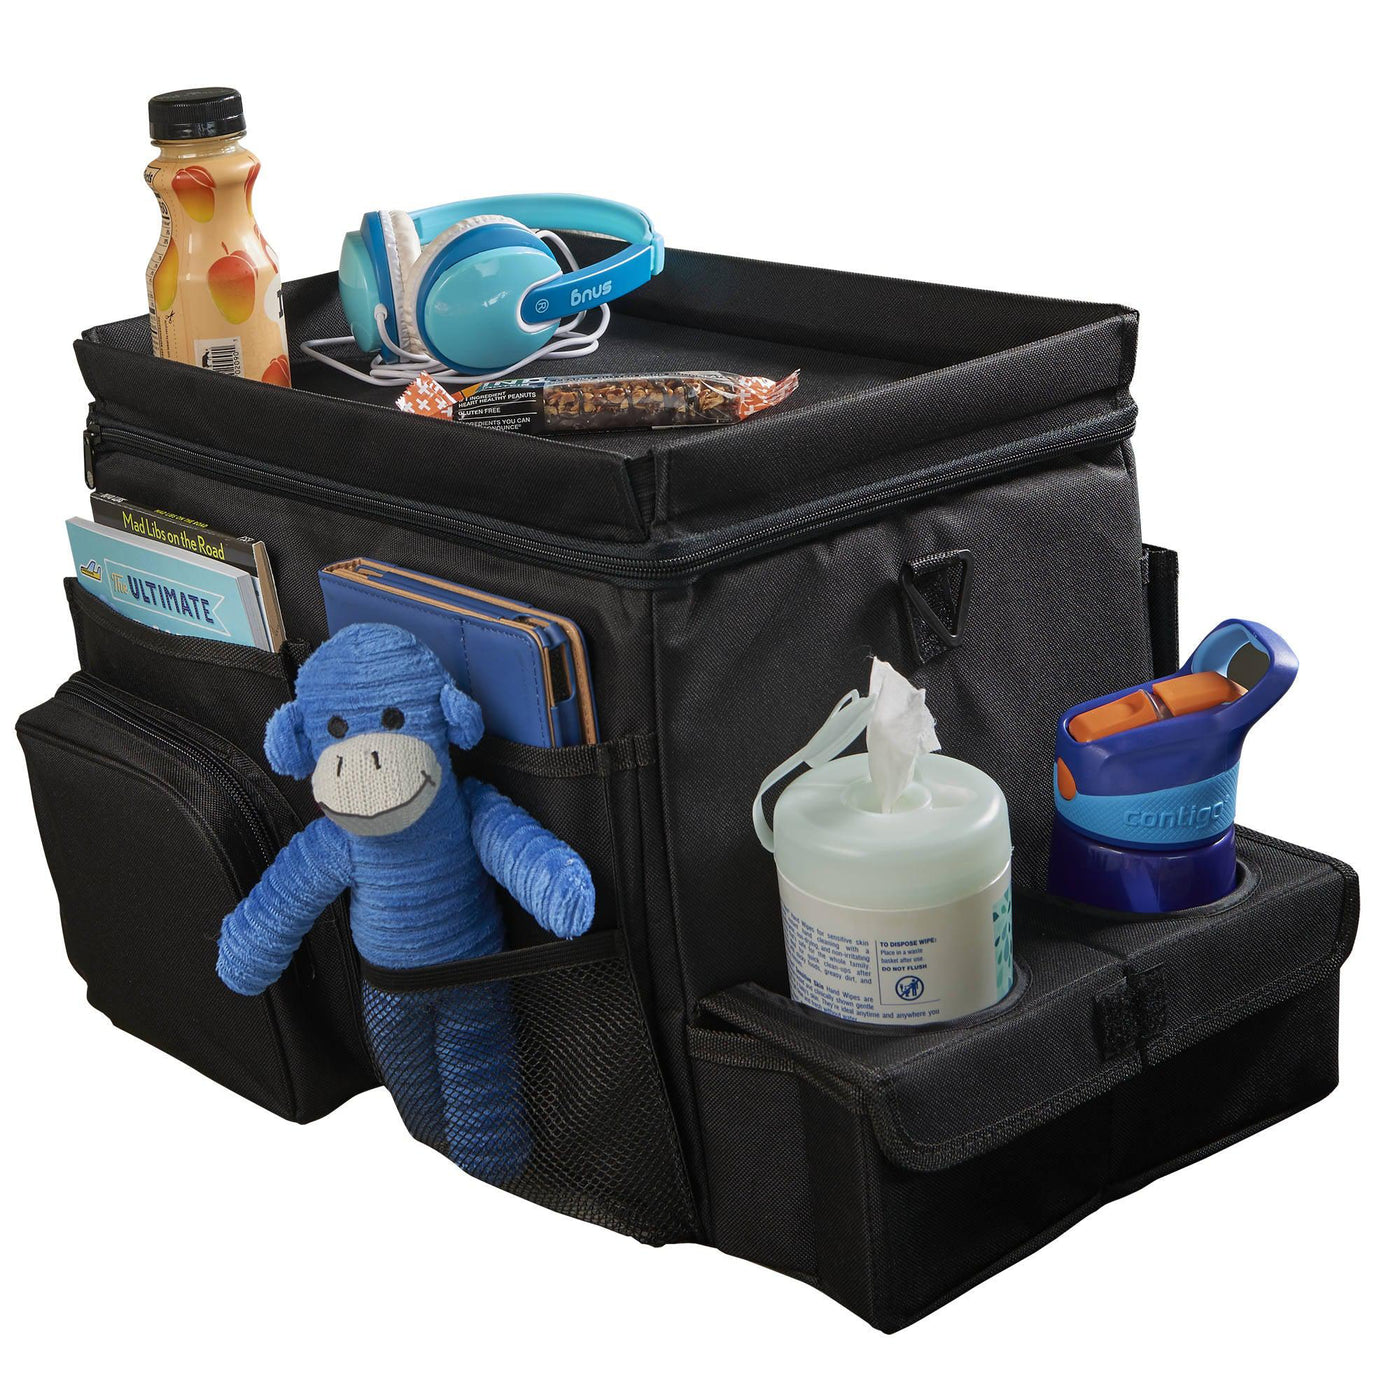 High Road Large CarHop Car Seat Organizer for the Front or Back Seat for  Kids and Adults with Cup Holder Tray, Side Pockets and Cooler Compartment